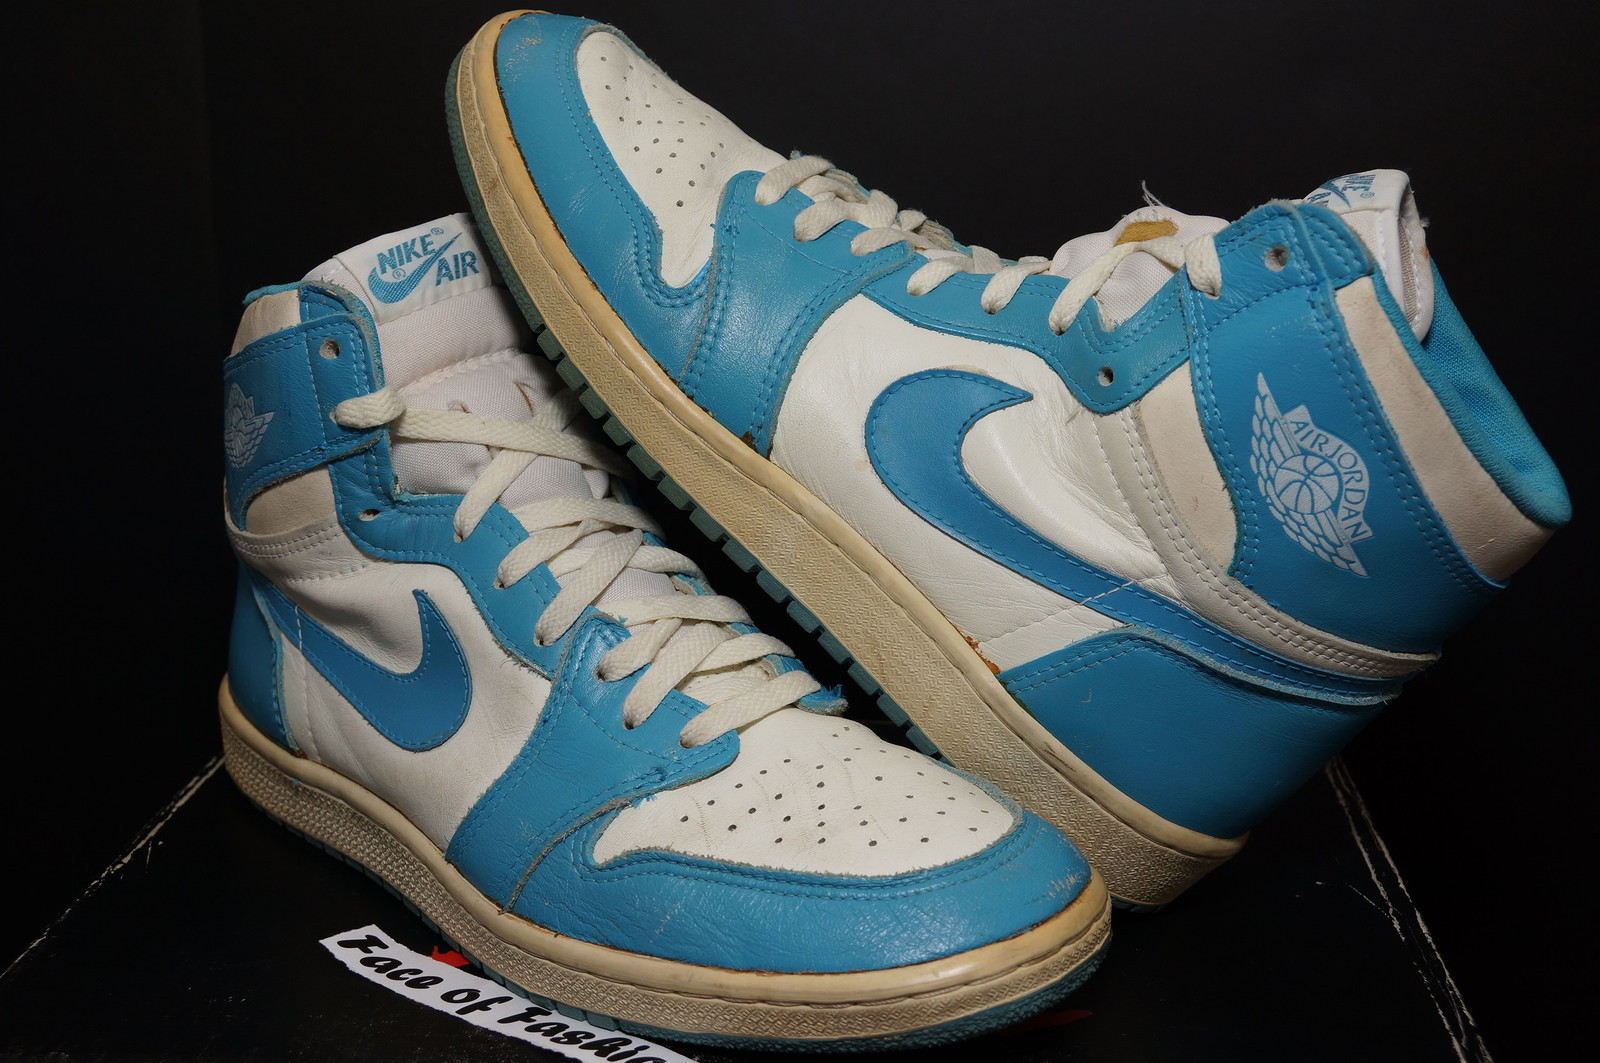 Jordan's 1s “Off White UNC” Size 9.5 &11 Brand New for Sale in Queens, NY -  OfferUp